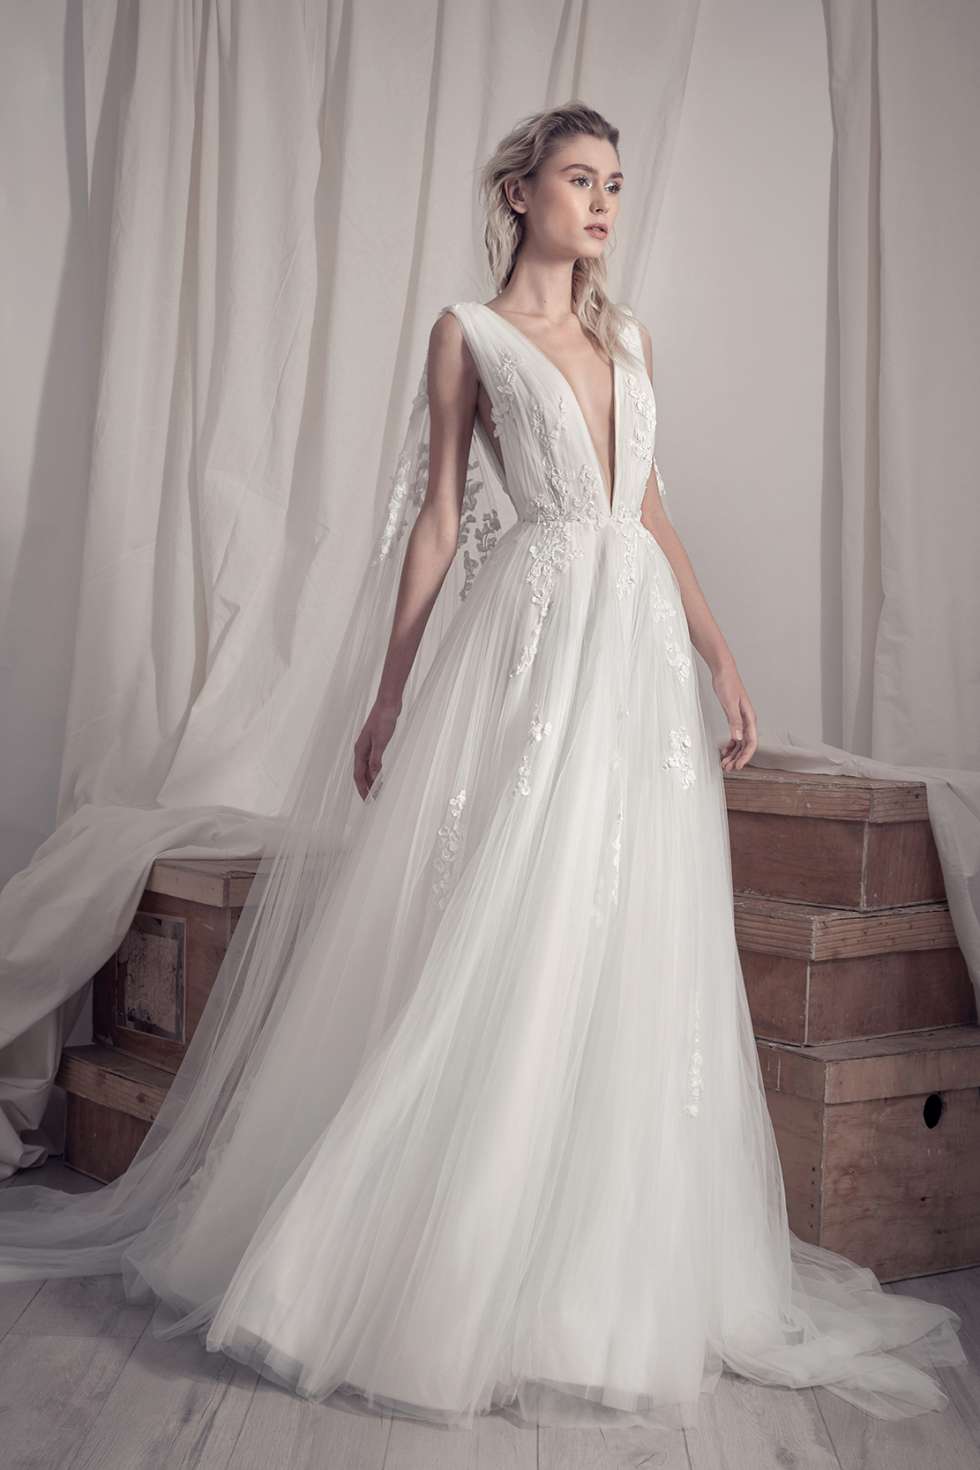 Beirut's Bridal Boutique, L’Atelier Blanc, Introduces Its First Wedding Collection